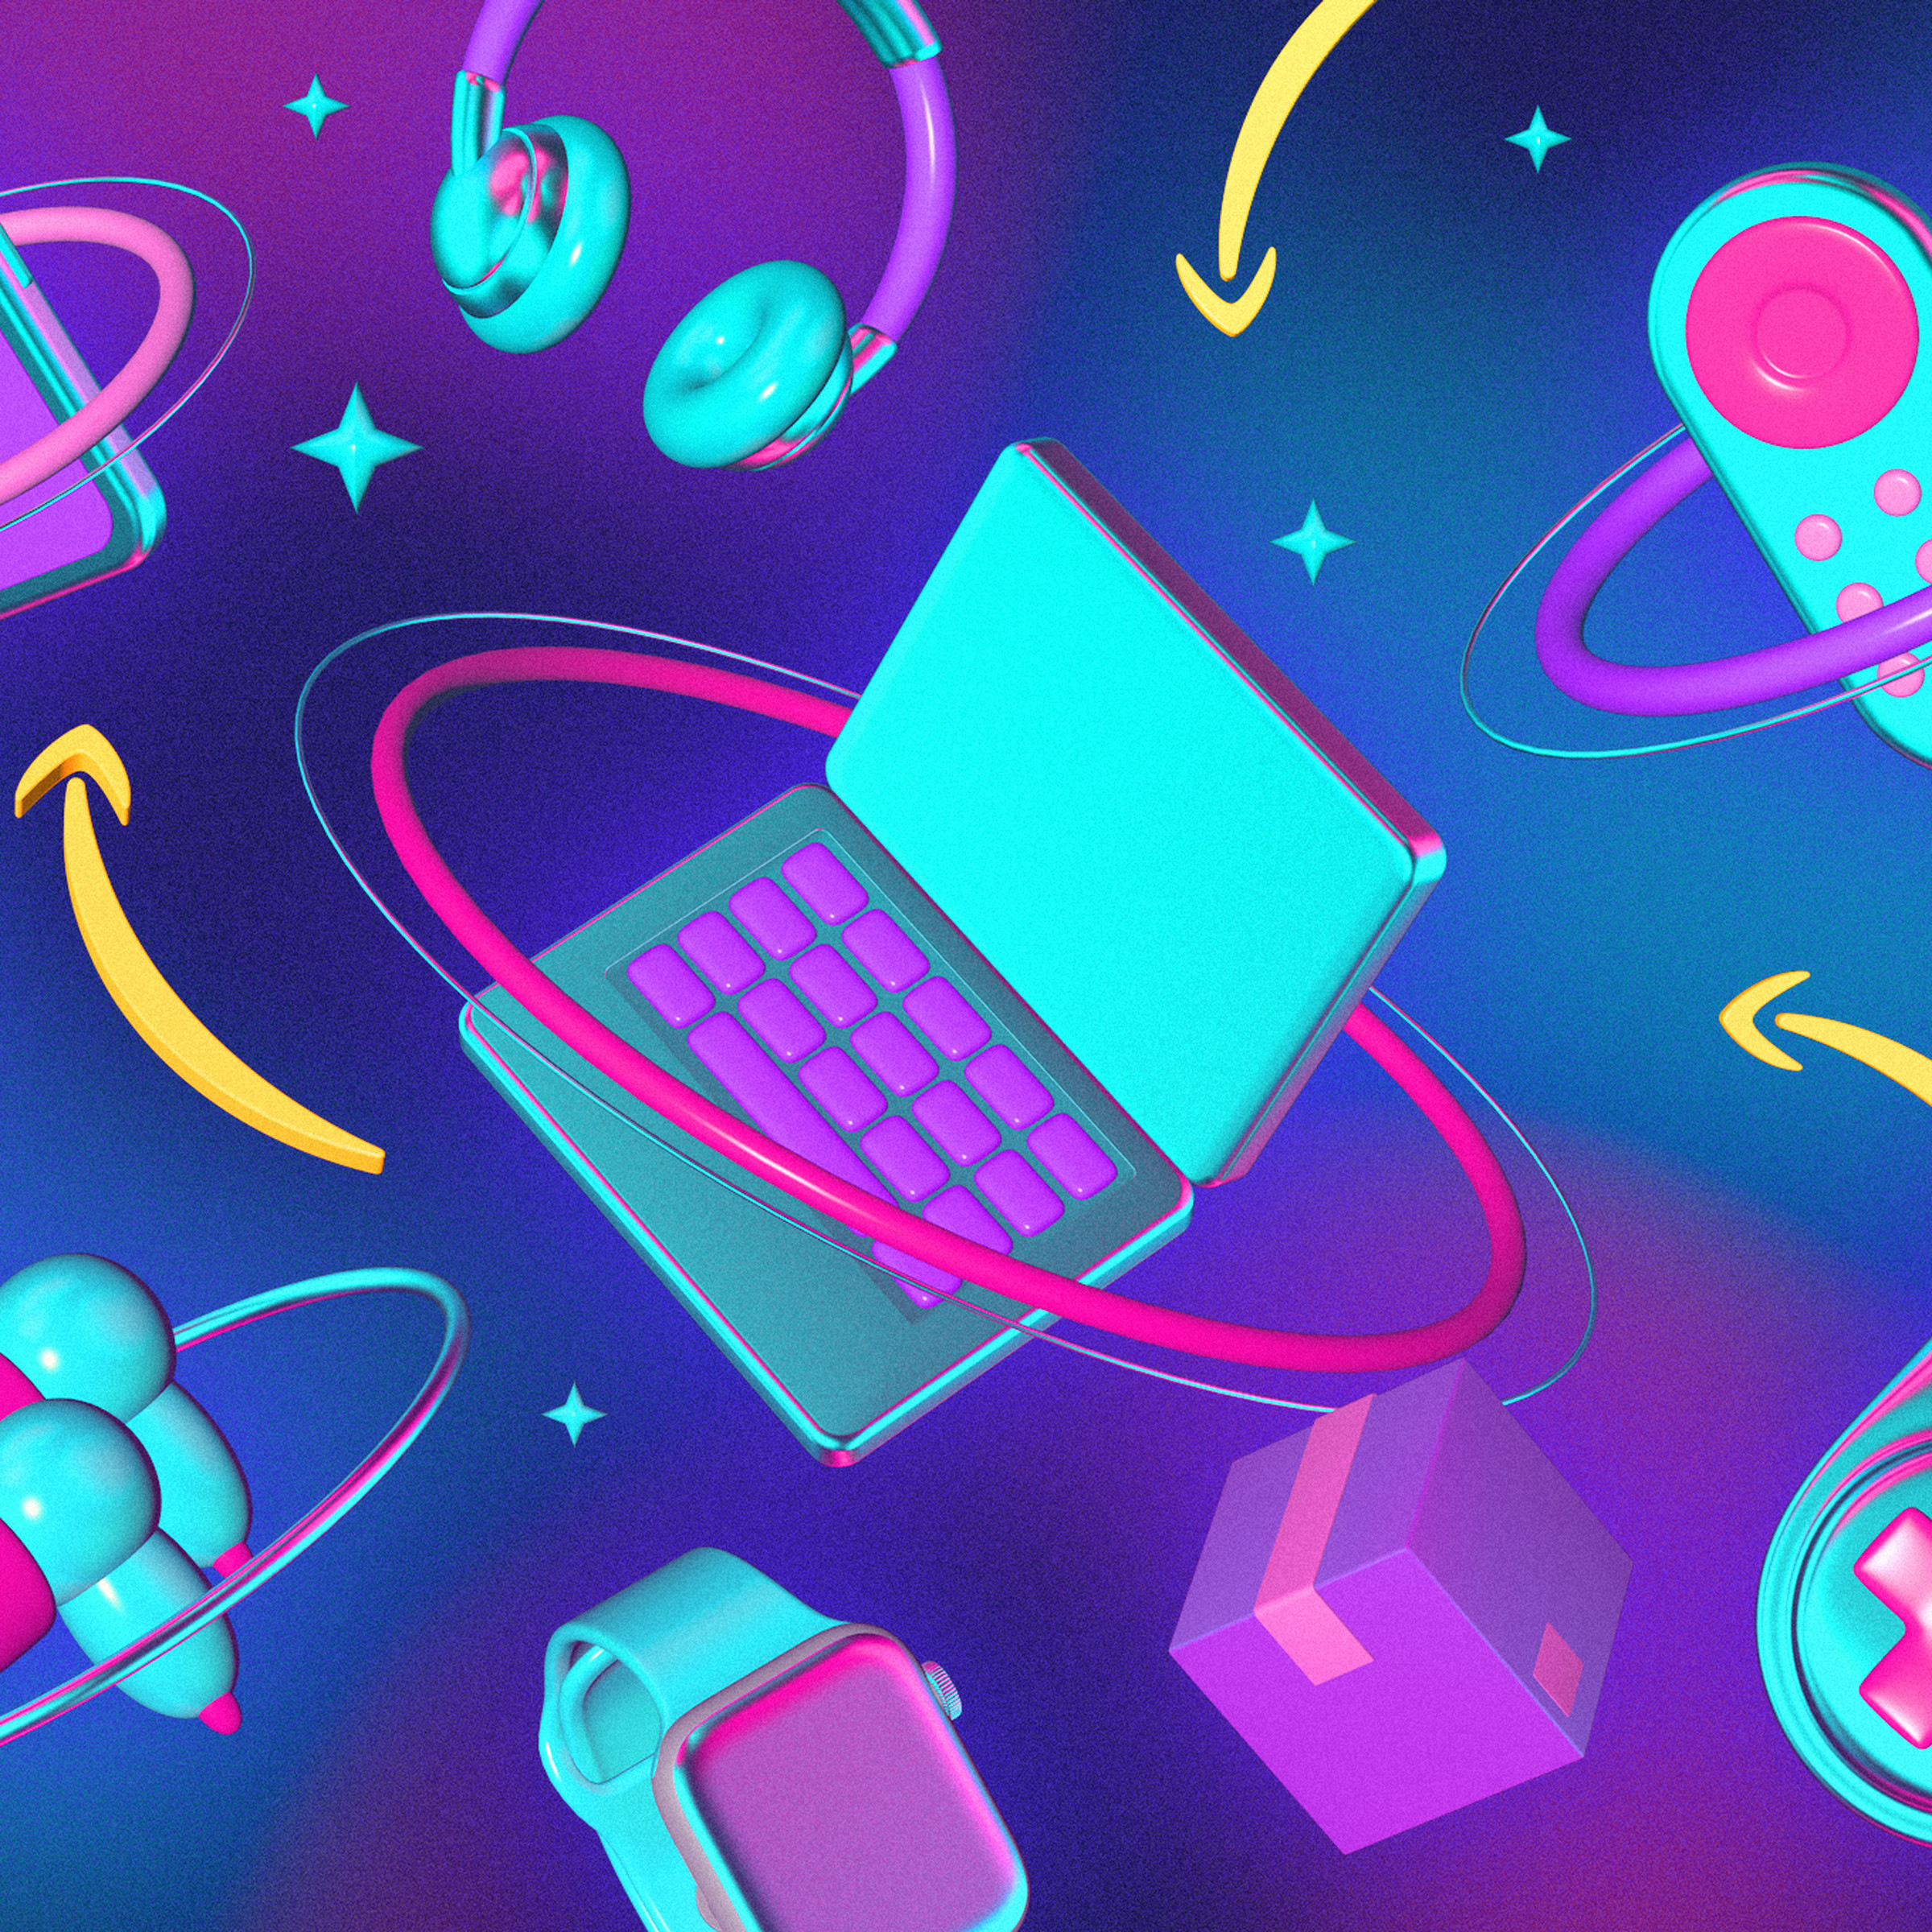 Illustration of a laptop and various other products floating in a starry sky, surrounded by Amazon arrows.